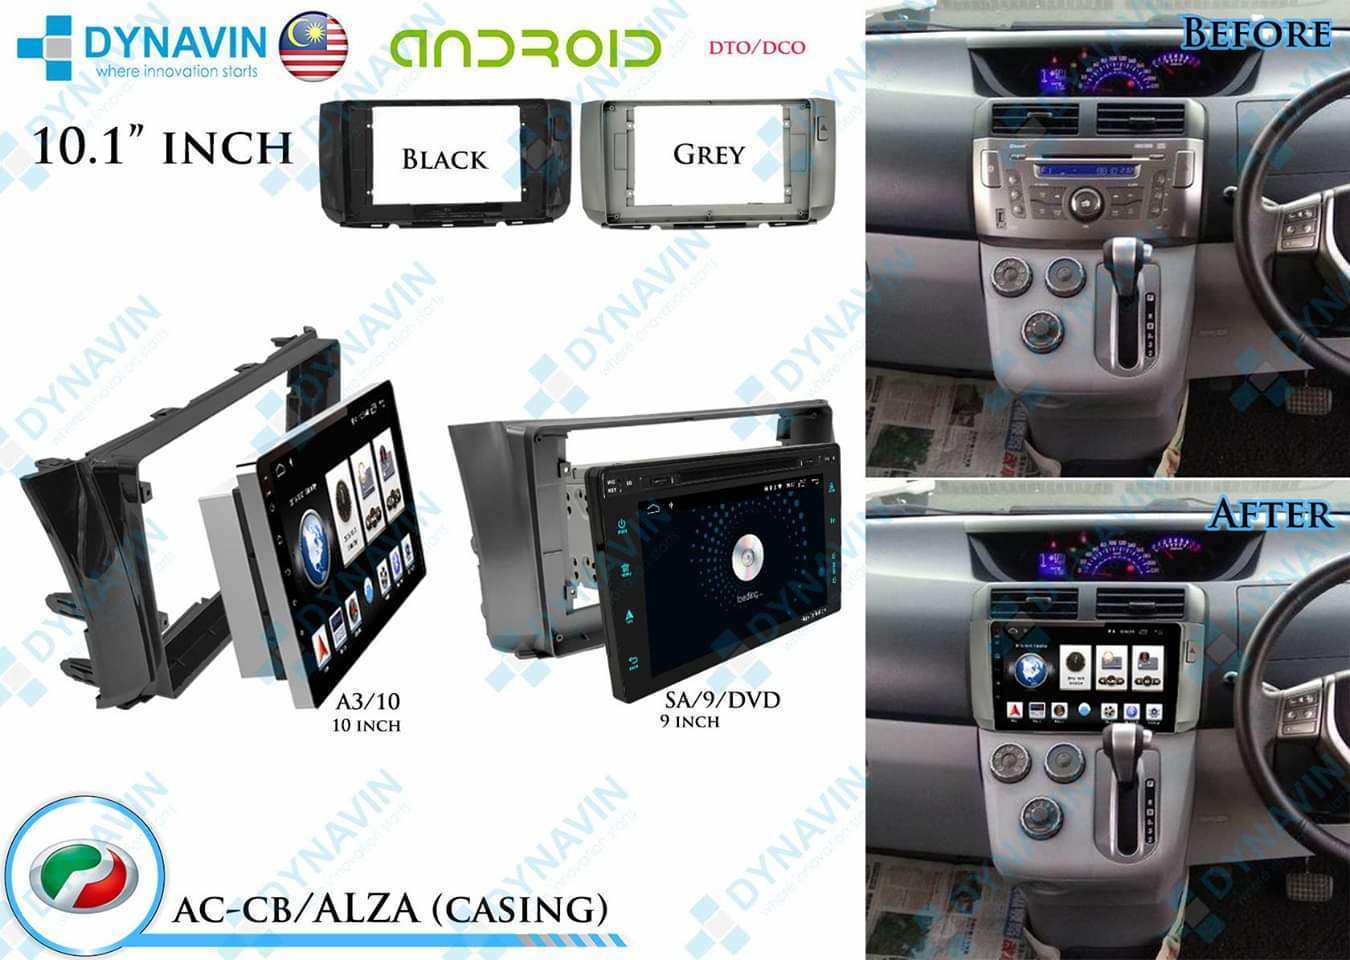 Perodua Alza 10.1" Inch Android Pl (end 10/20/2021 12:00 AM)